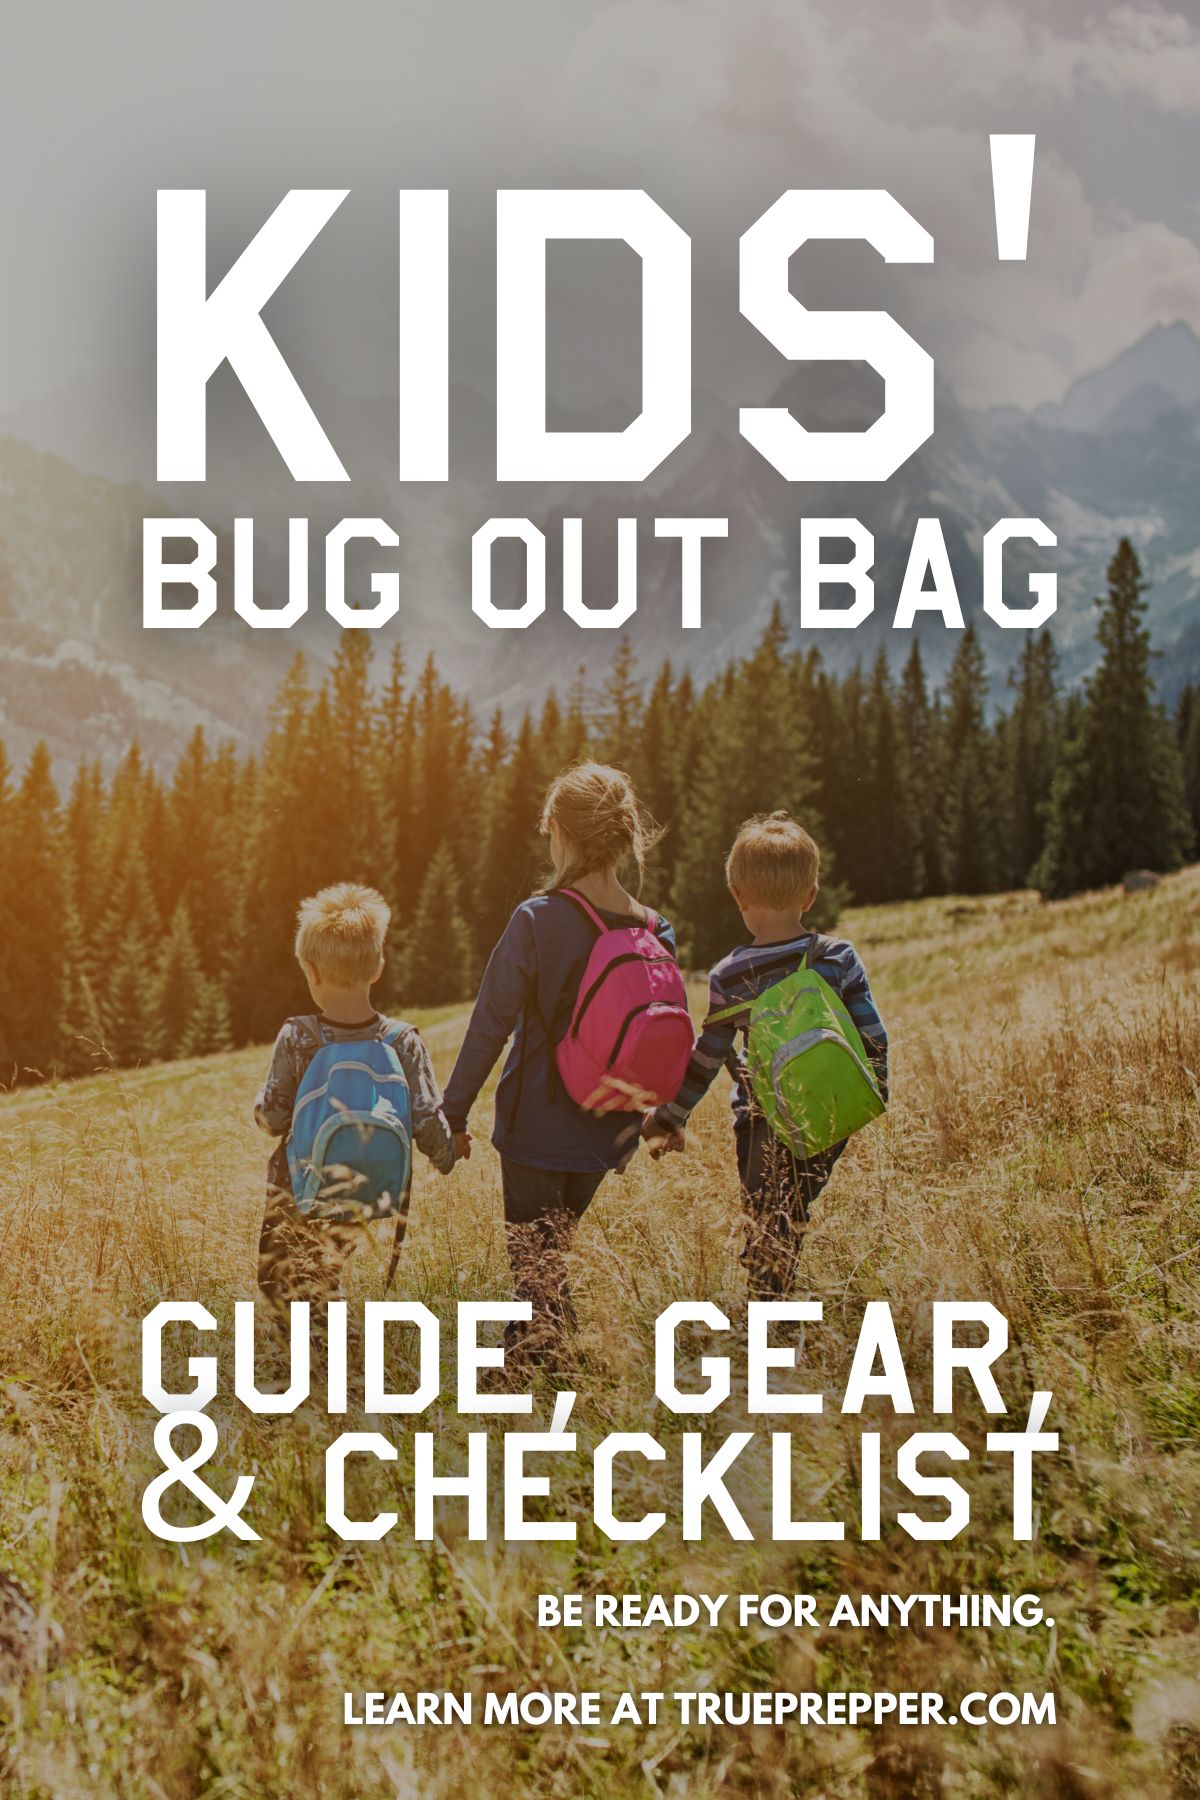 Kids' Bug Out Bag Guide Gear and Checklist